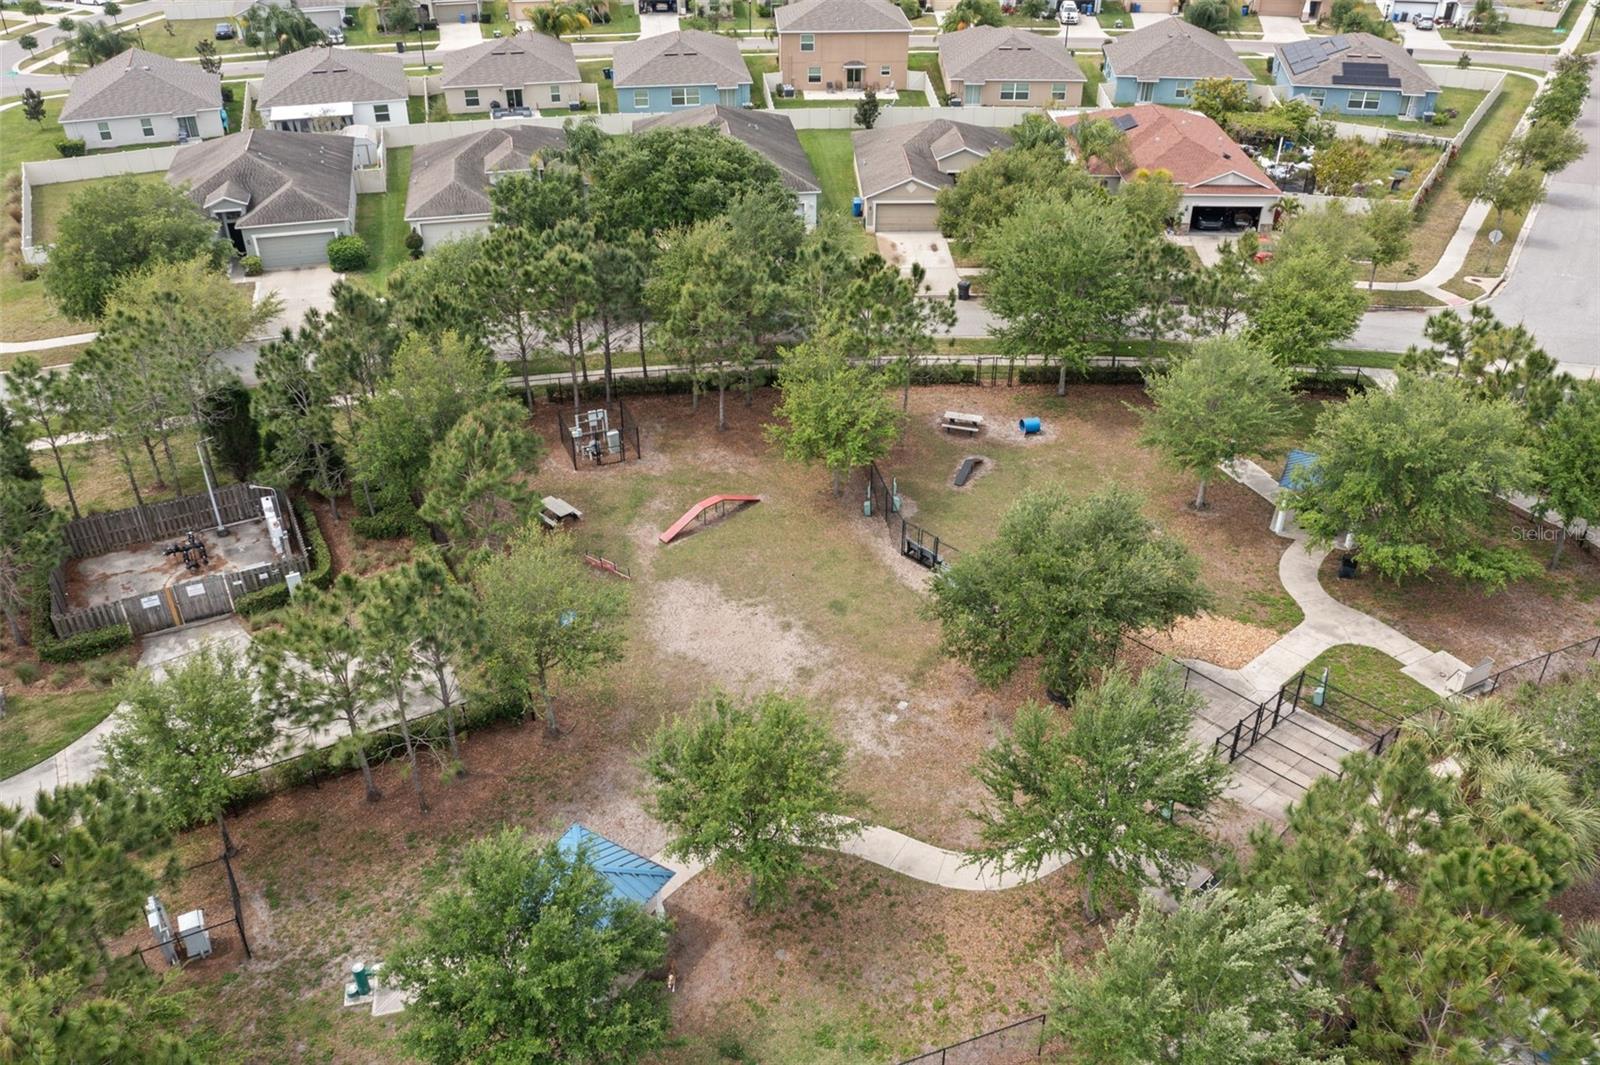 Aerial view of community dog park